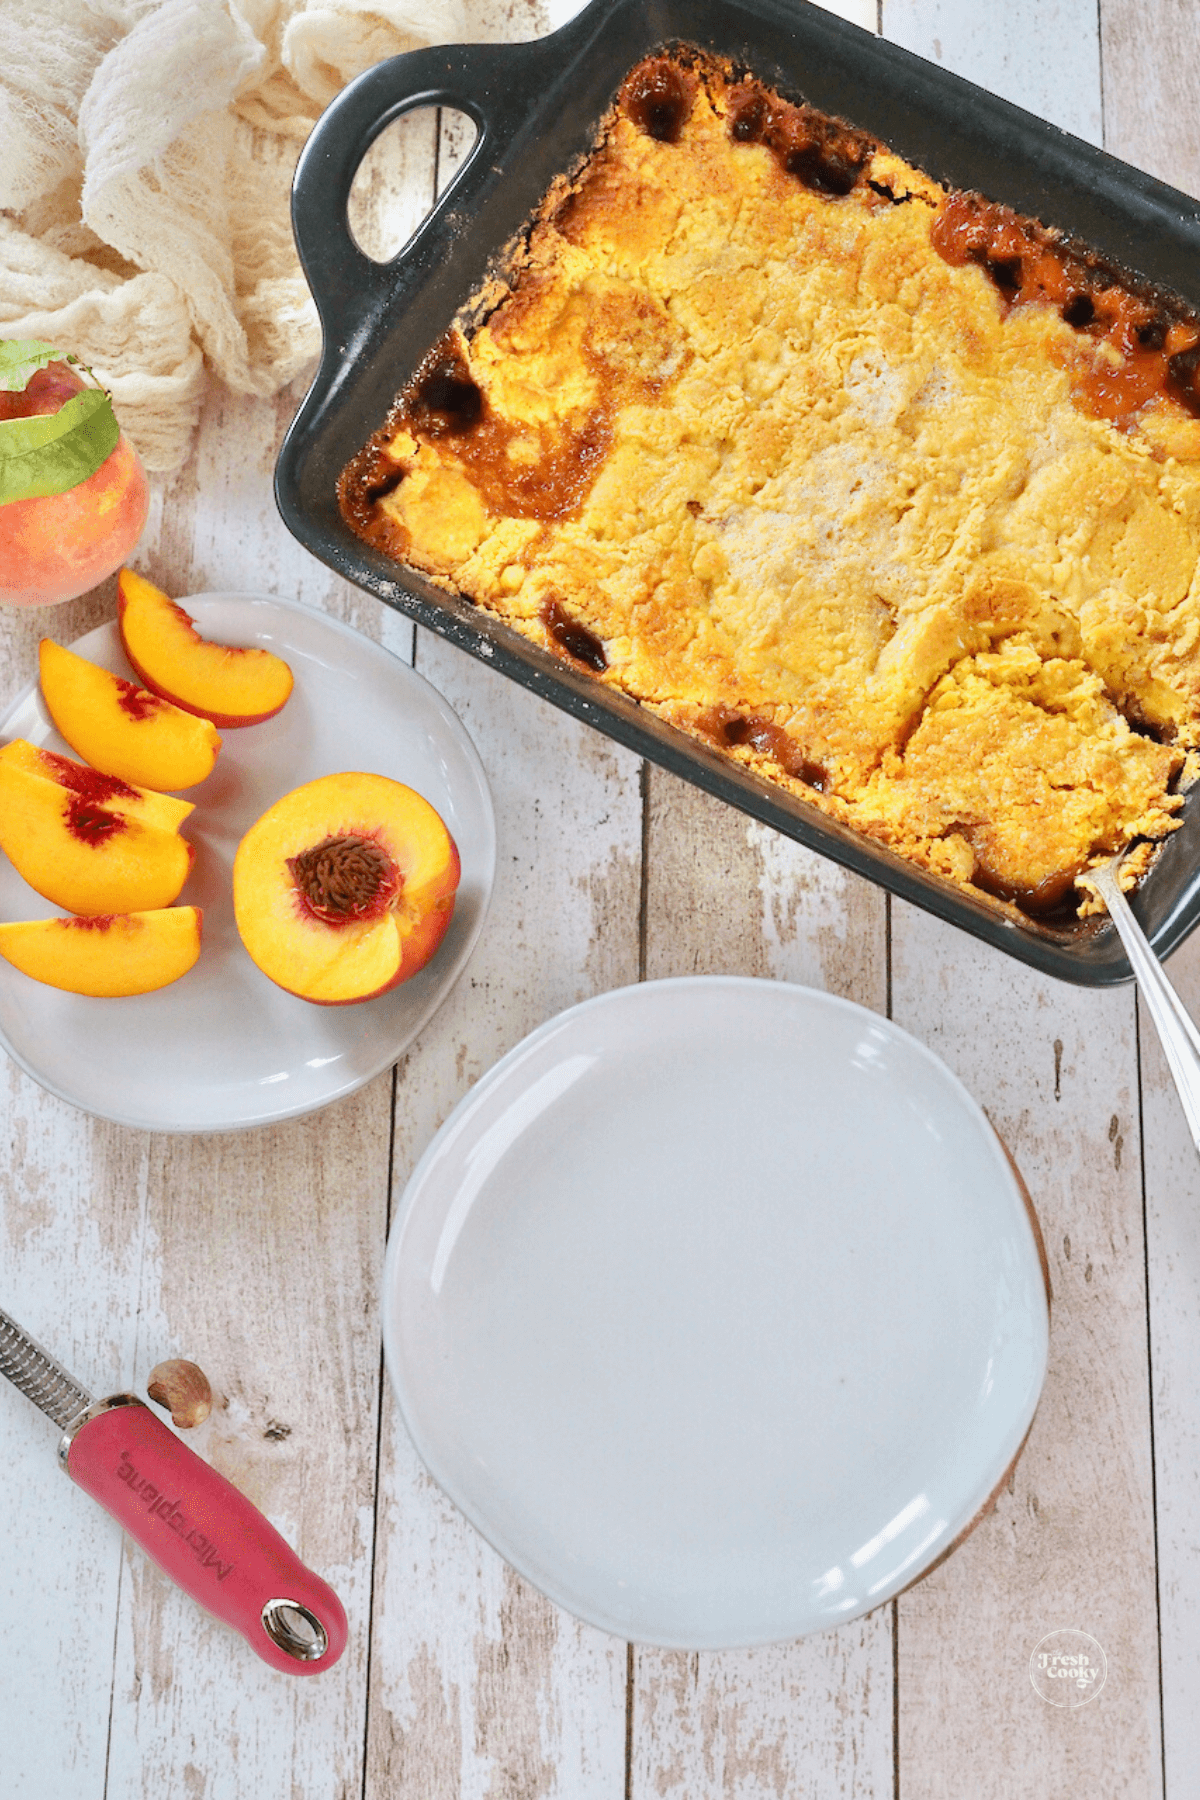 Peach cobbler with cake mix baked in pan, ready to serve.